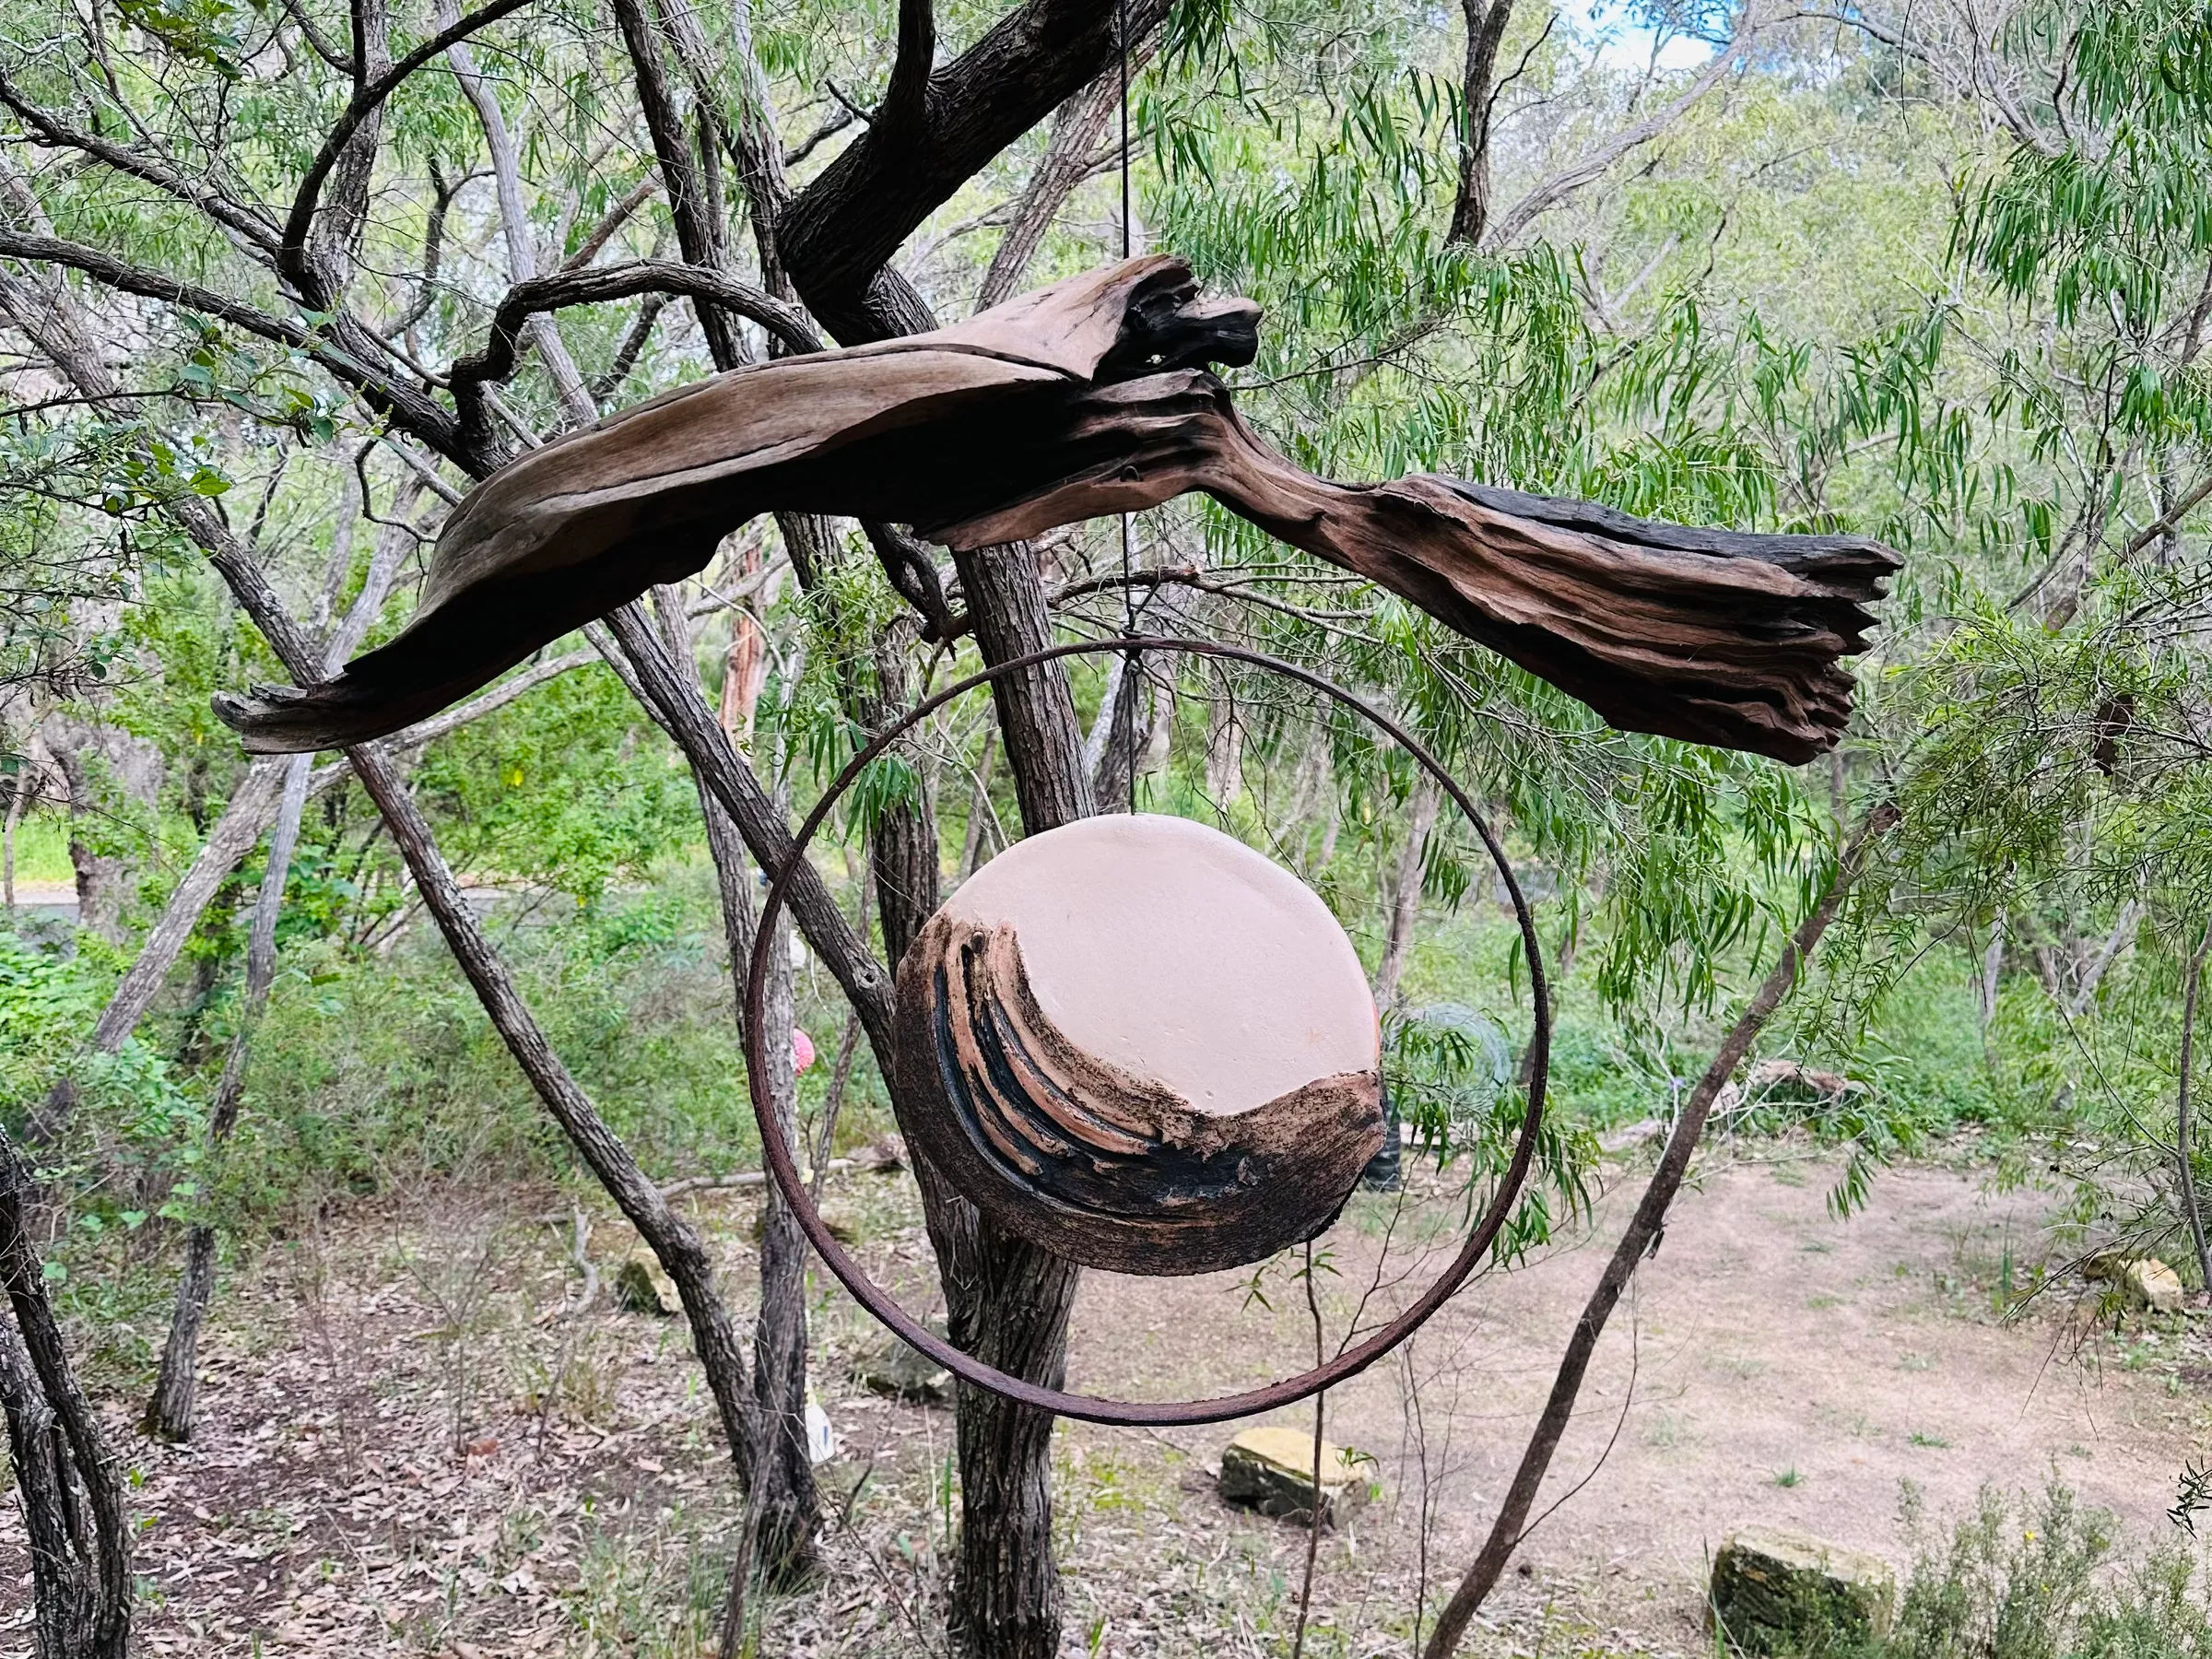 Image of a sculpture in a forest